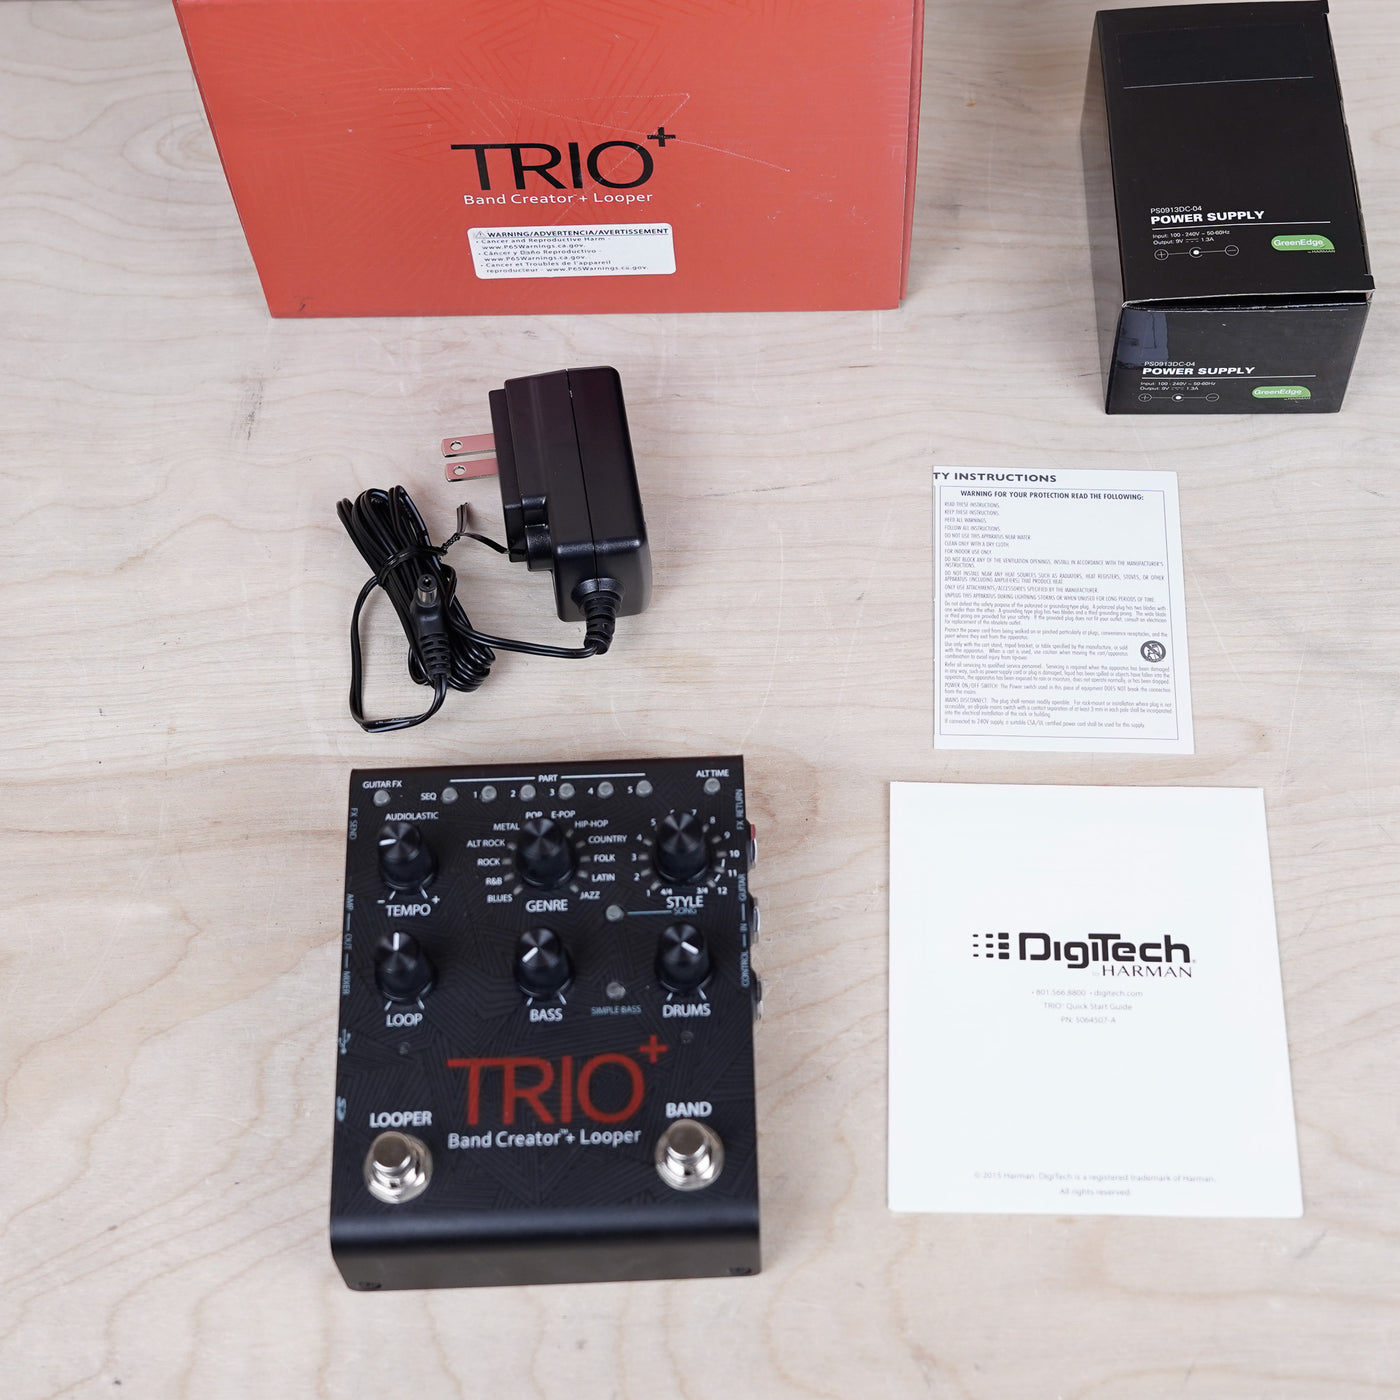 DigiTech TRIO Plus Band Creator + Looper in Box with Power Adapter, 16gb SD card, Paperwork